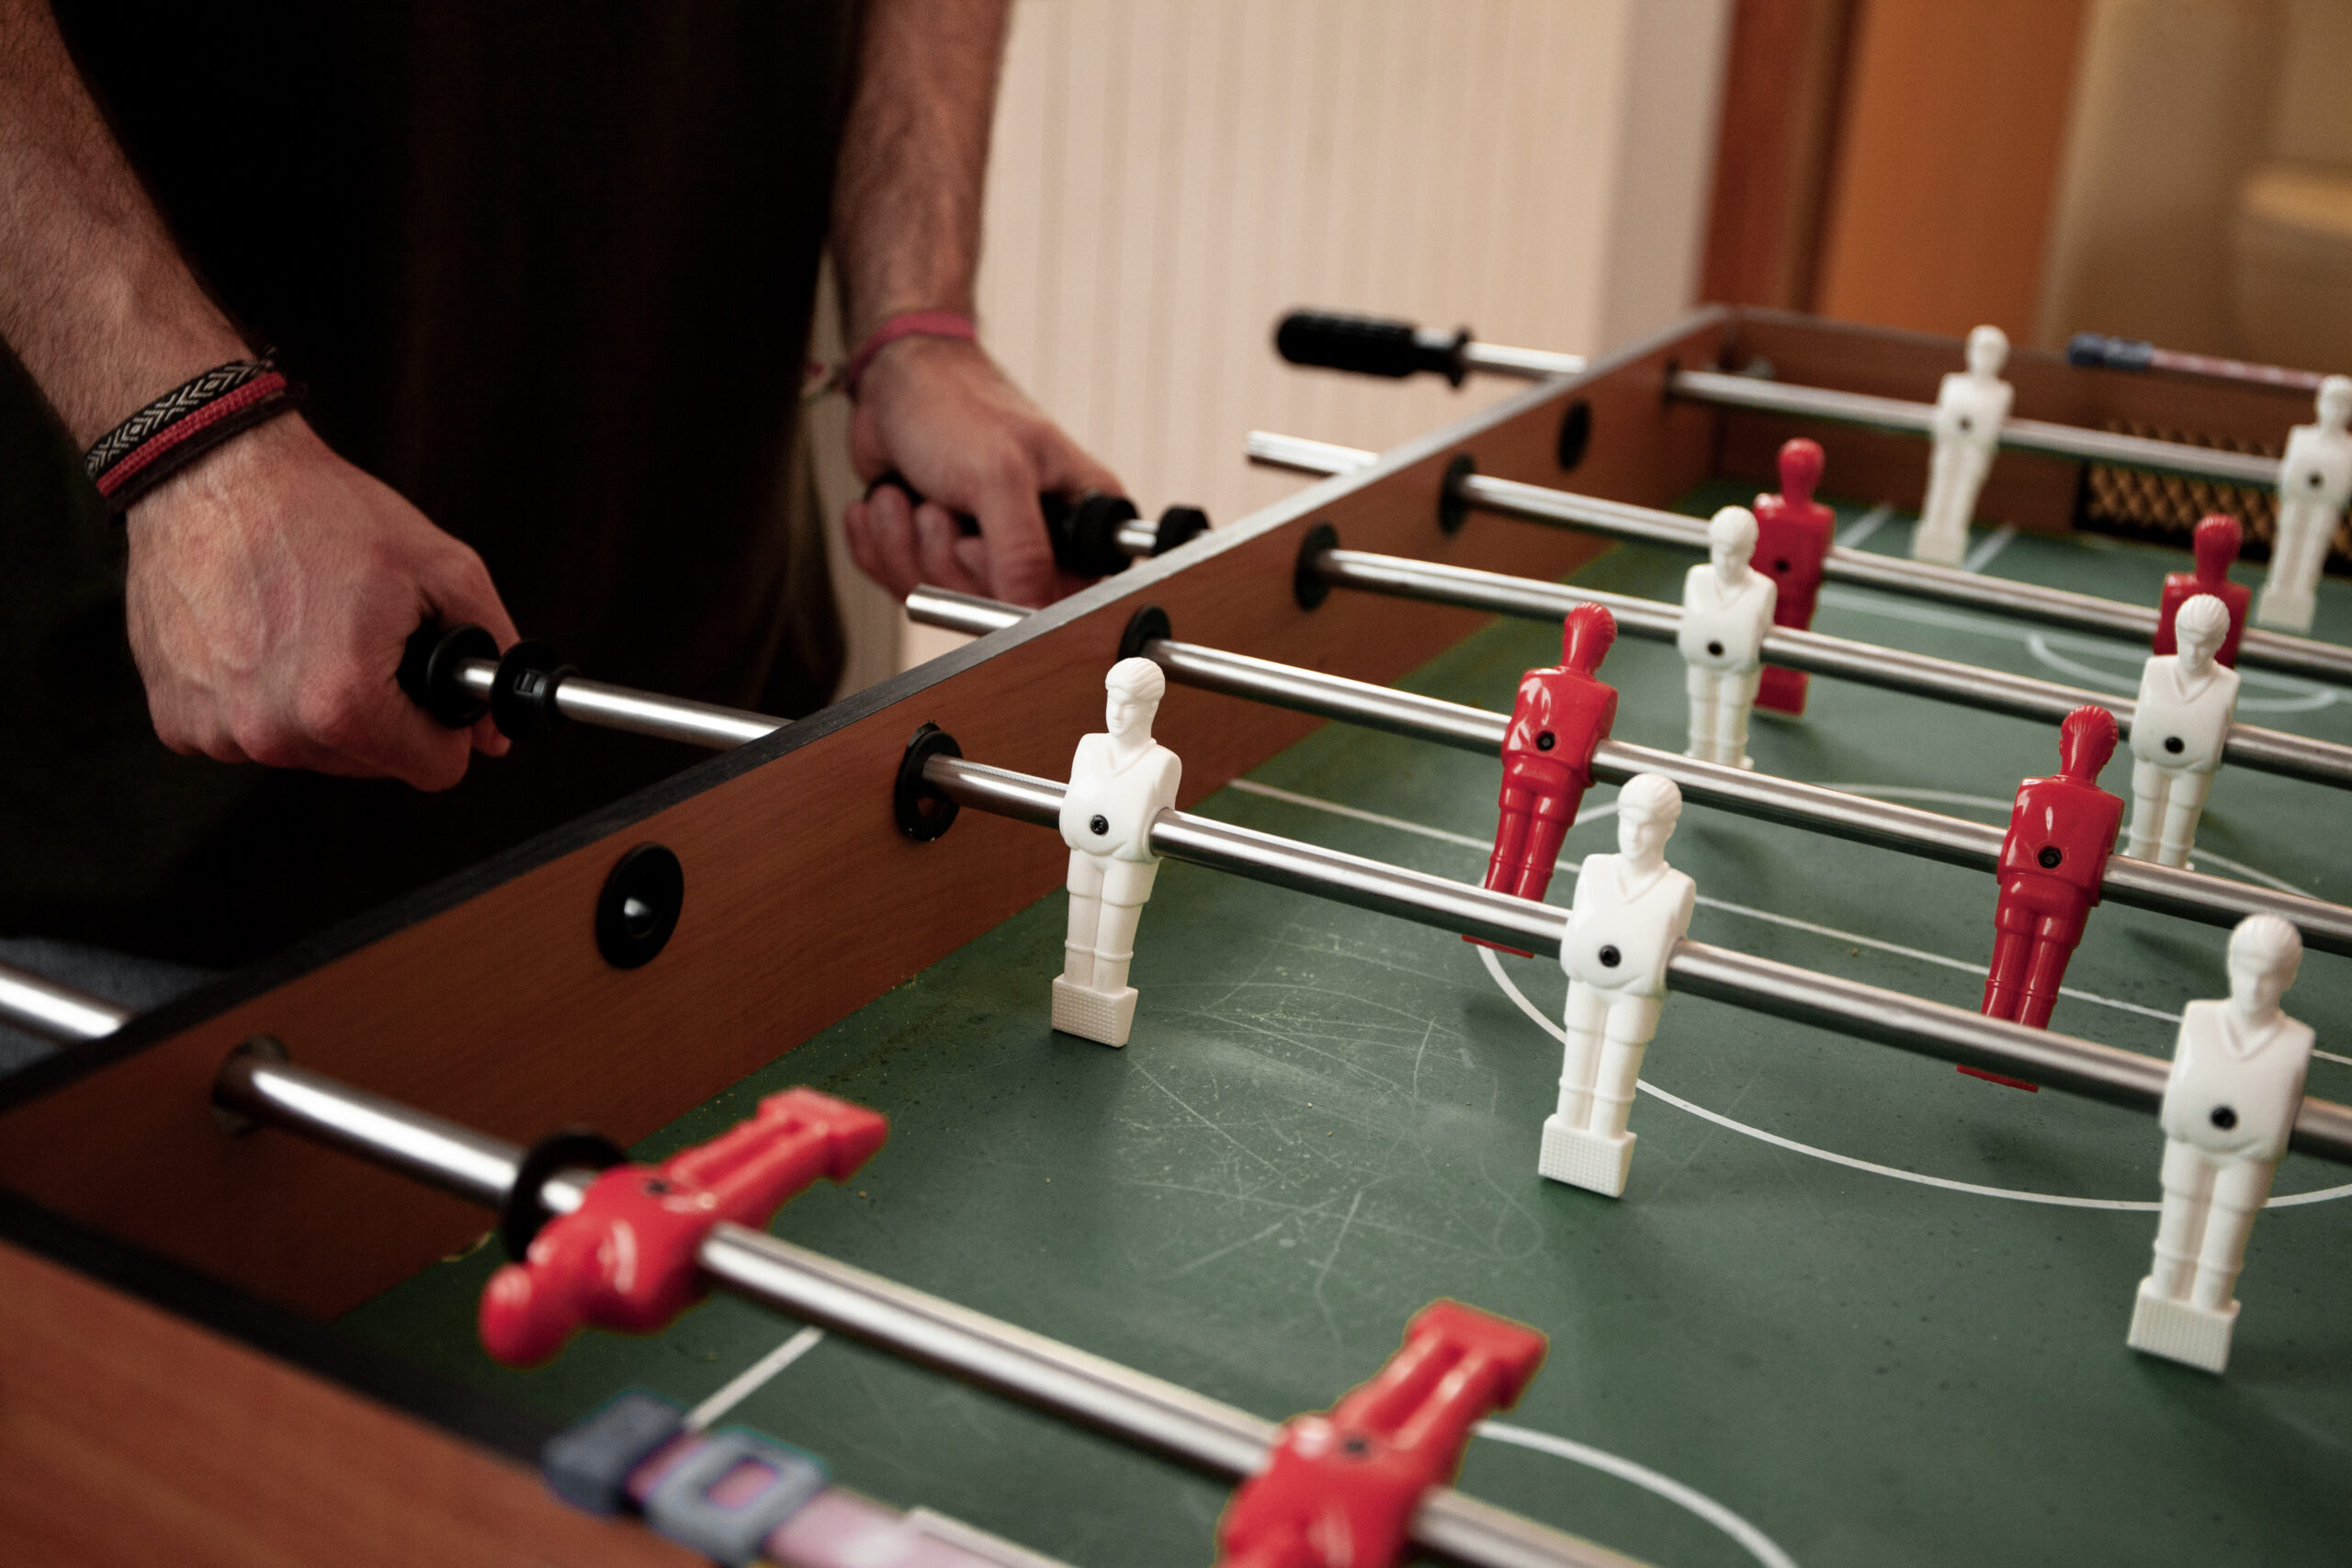 How to Perform Advanced Foosball Shots and Techniques?